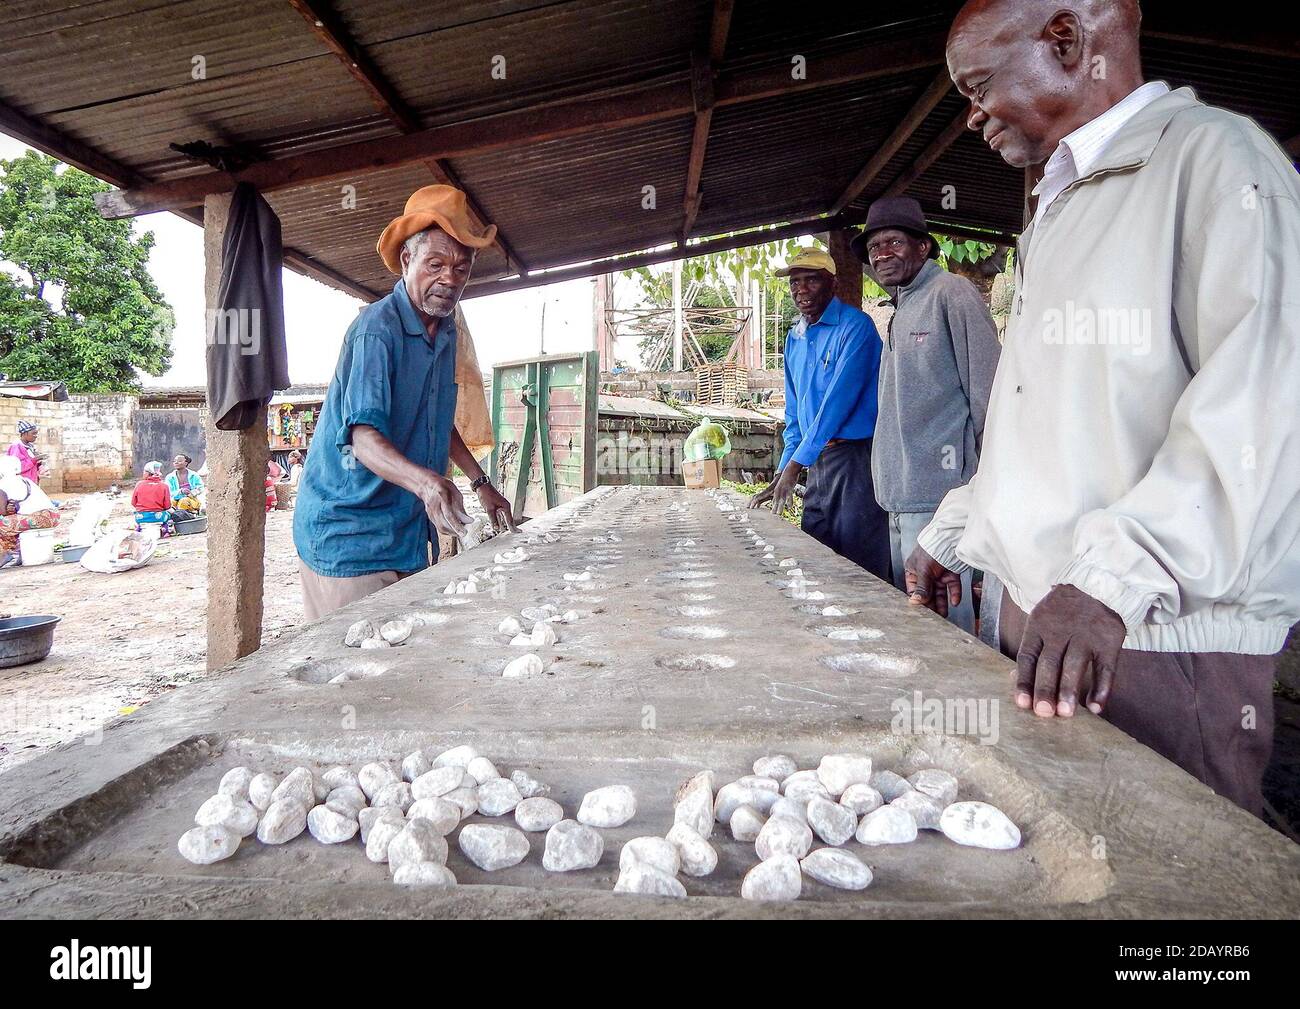 Aggrey Daka, 85, (CQ) left, plays a traditional Zambian game known as Nsolo (similar to mancala) with his fellow elders on Jan 25, 2017 at Mtendere Market shelter, (CQ) in Lusaka, the capital city of Zambia. Daka, who stays at the shelter, says that playing the game reminds them of playing the game as young men and of the “good old days”.  (Prudence Phiri, GPJ Zambia) Stock Photo